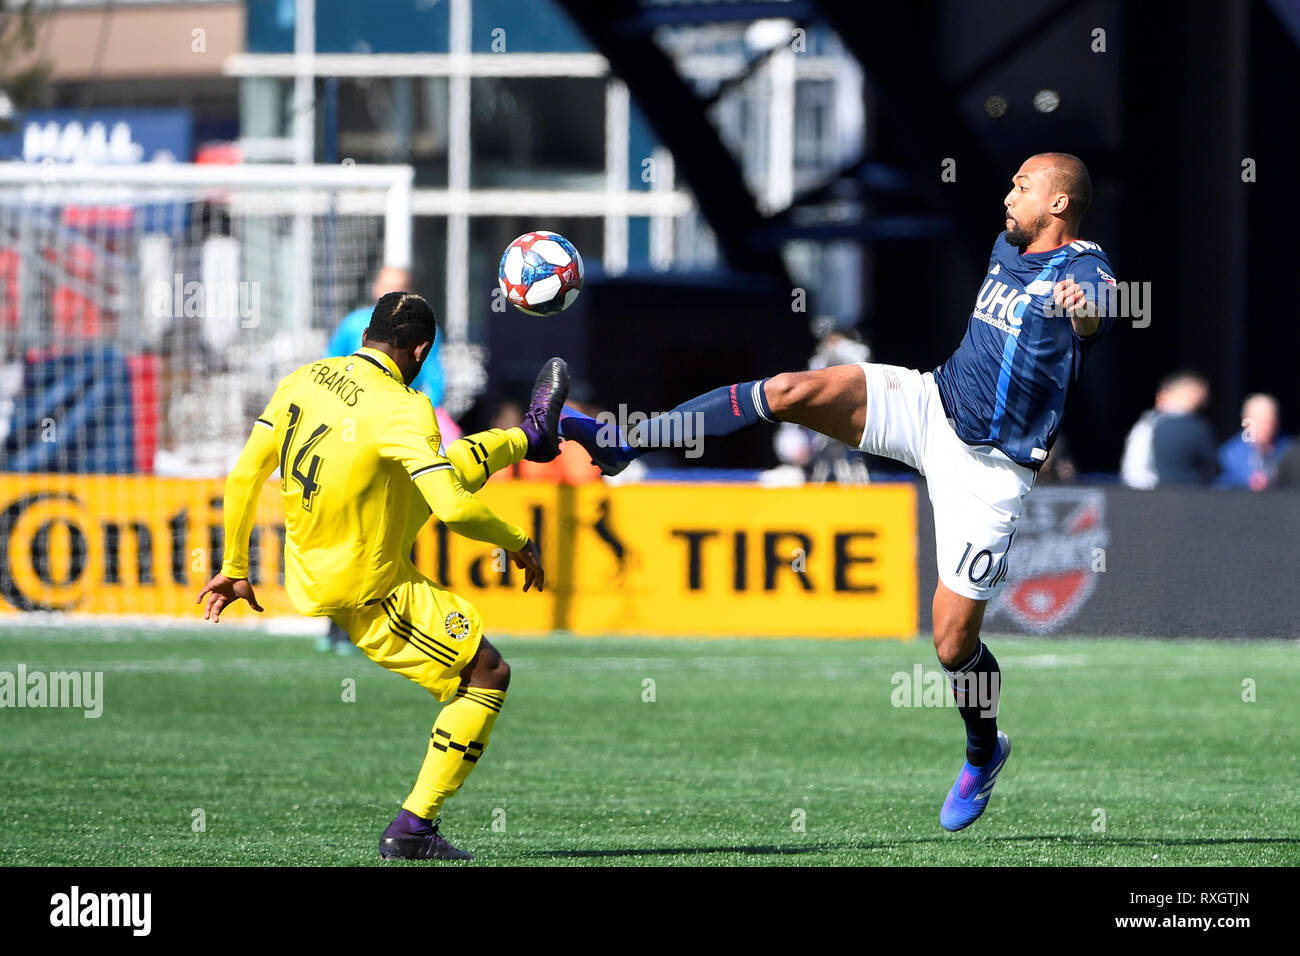 Foxborough Massachusetts, USA. 9th Mar, 2019. Columbus Crew defender Waylon Francis (14) and New England Revolution forward Teal Bunbury (10) battle for the ball on the pitch during the MLS game between Columbus Crew and the New England Revolution held at Gillette Stadium in Foxborough Massachusetts. Columbus defeats New England 2-0. Eric Canha/CSM .CAPTION CORRECTION.Corrects an earlier version with an incorrect headline Credit: csm/Alamy Live News Stock Photo